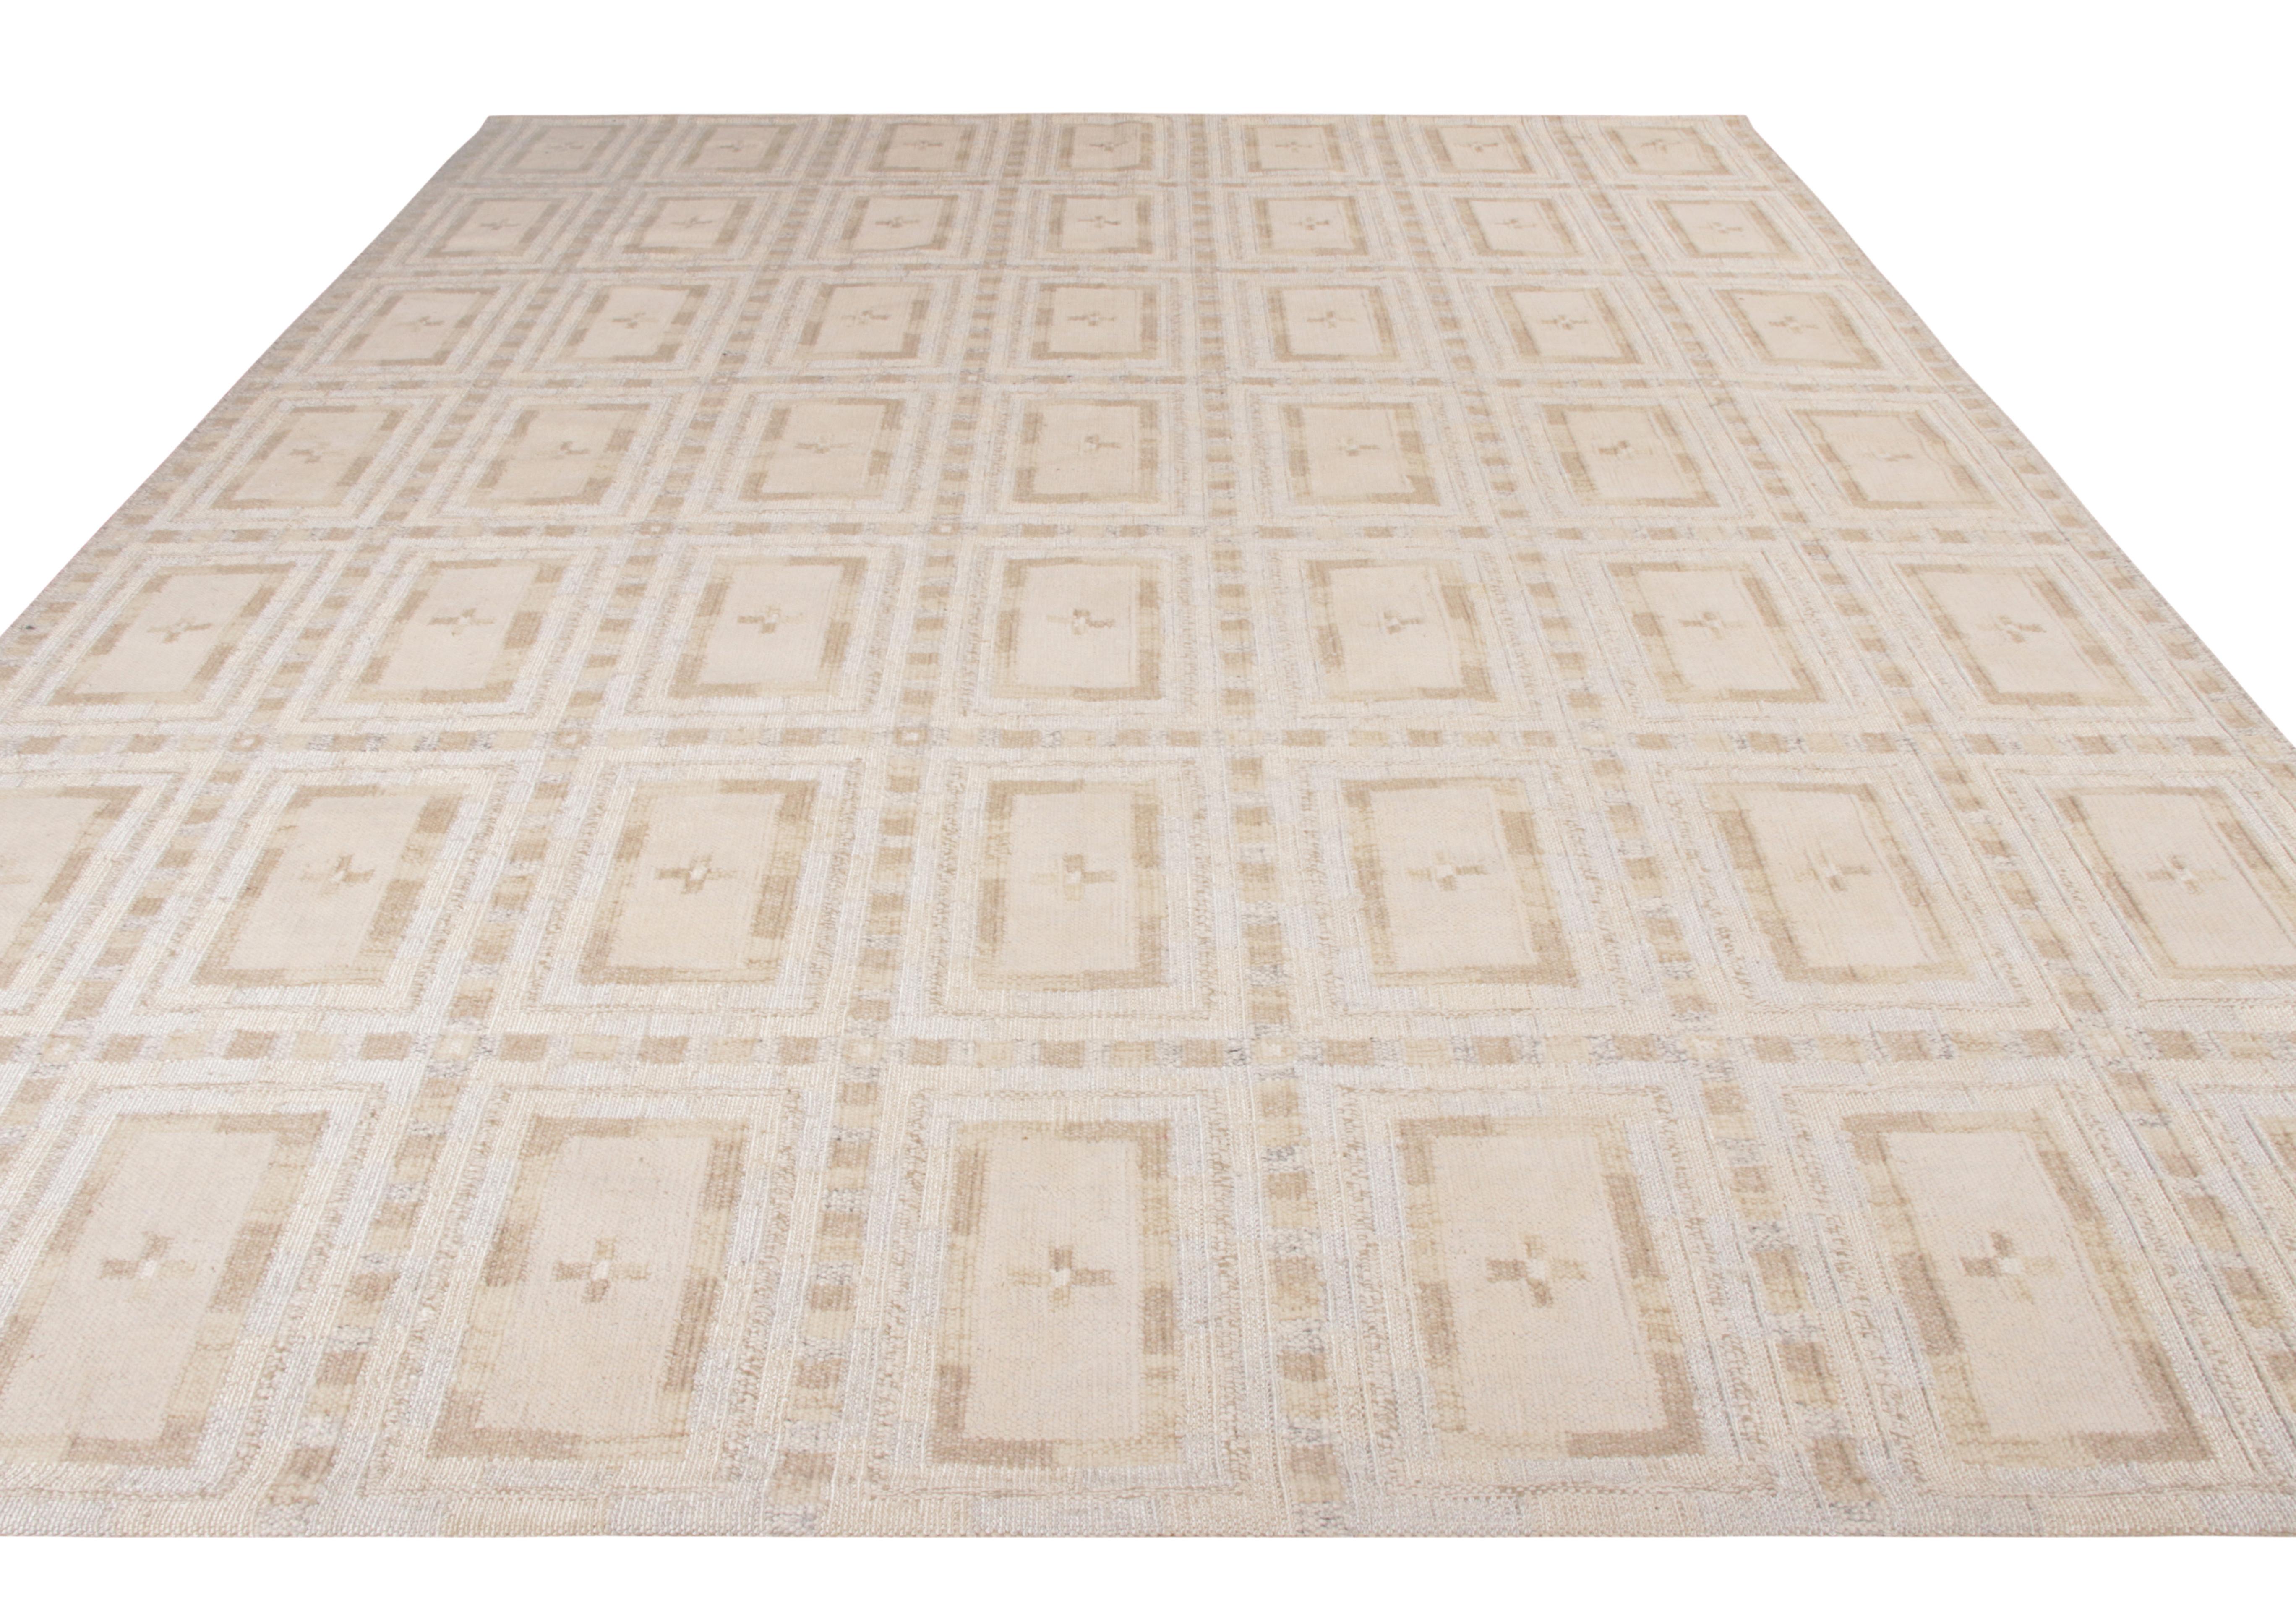 A custom Kilim rug from the acclaimed Scandinavian Collection by Rug & Kilim. Handwoven in wool and natural yarns, exemplified in this all over geometric pattern of beige-brown with crisp white and blue accents. Further enjoying a durable body more